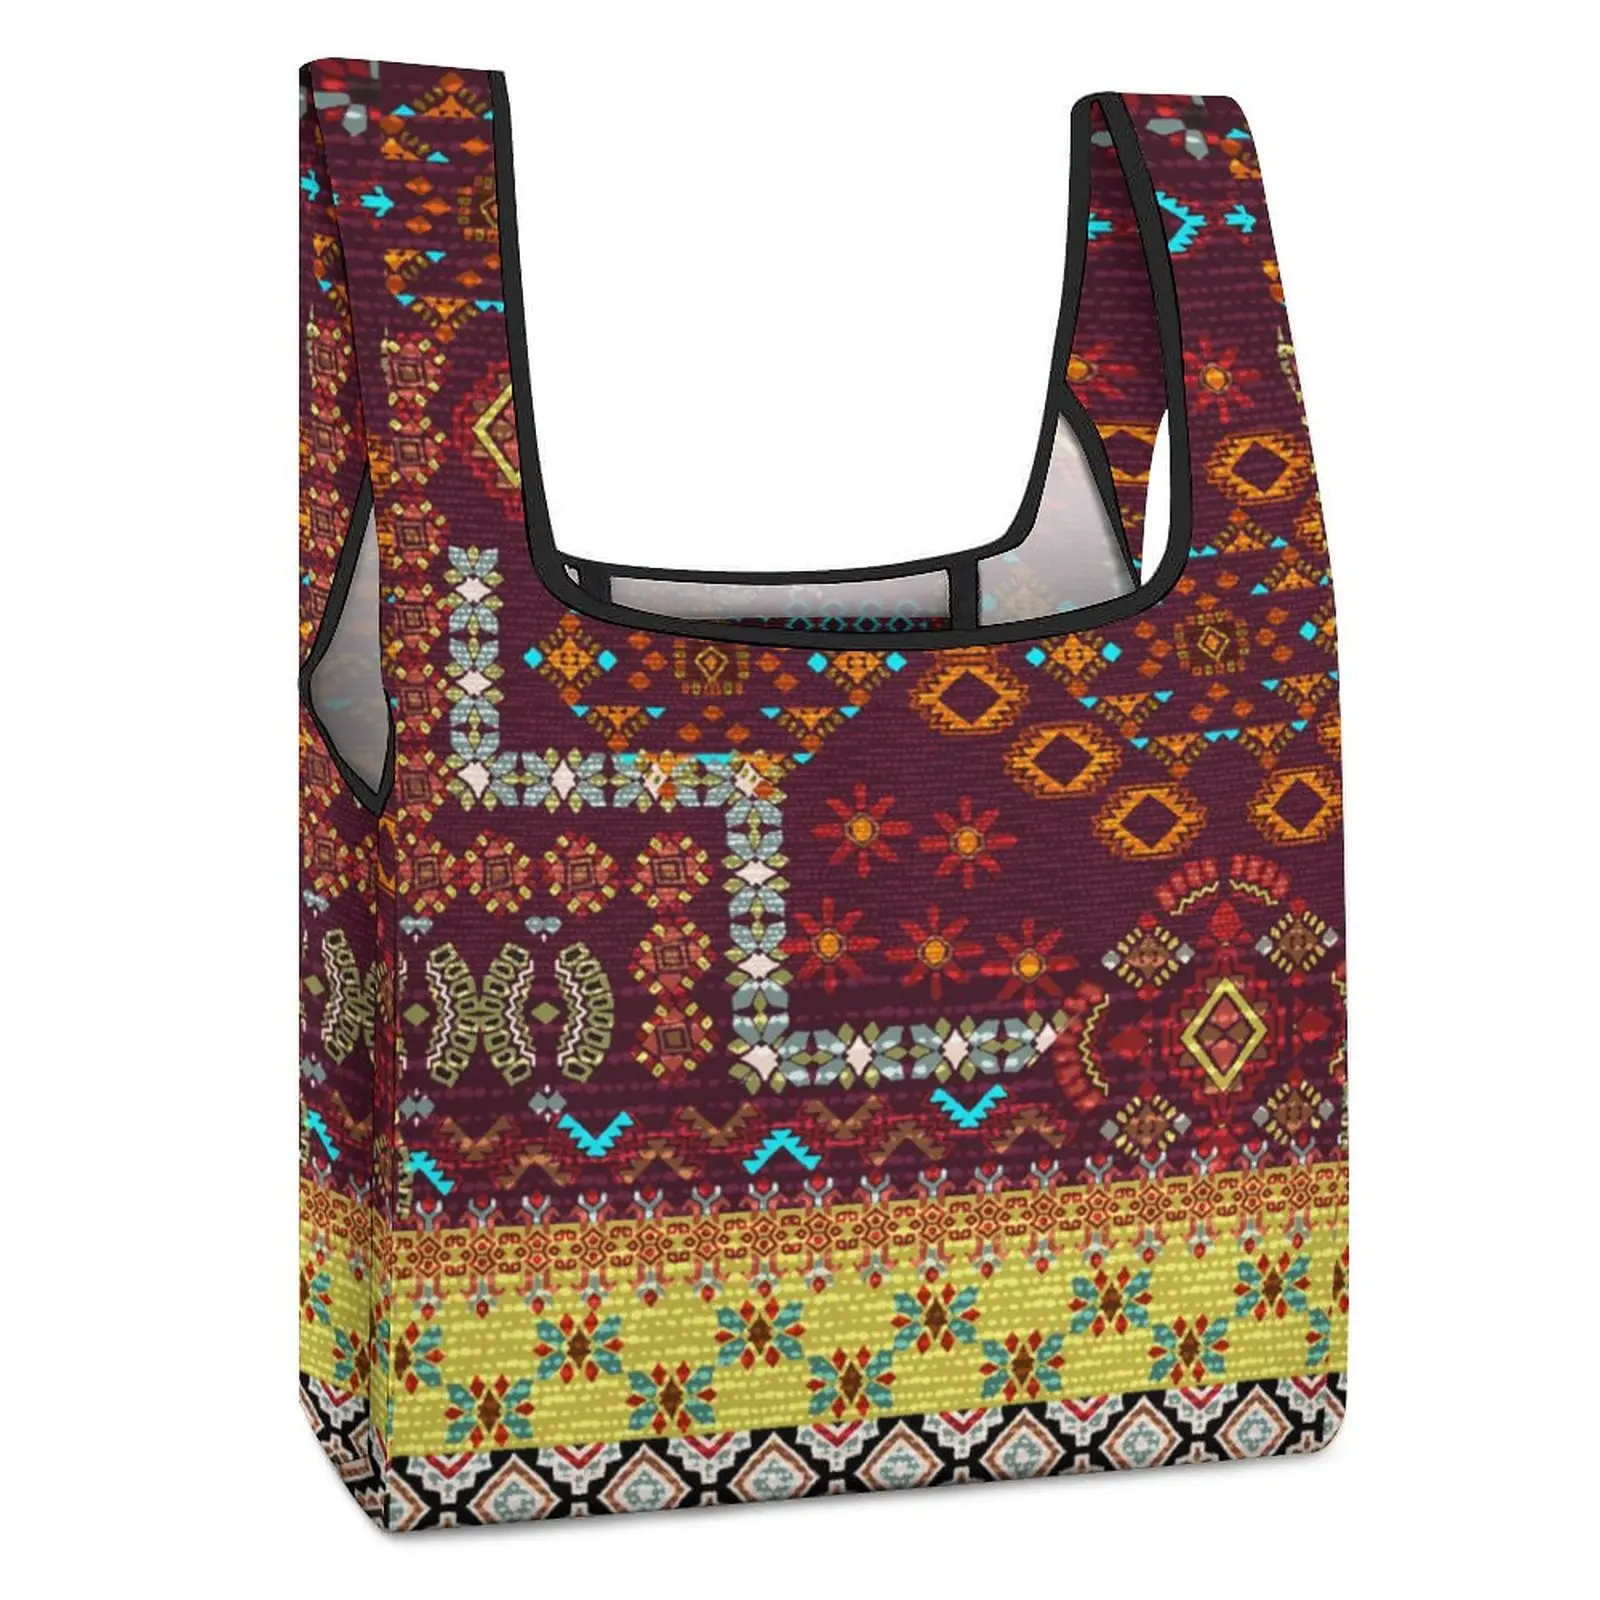 2pcs Ethnic Retro Style Tote Foldable Shopping Bag with Handles Shopper Bag Casual Woman Grocery Bag Custom Pattern Totebag